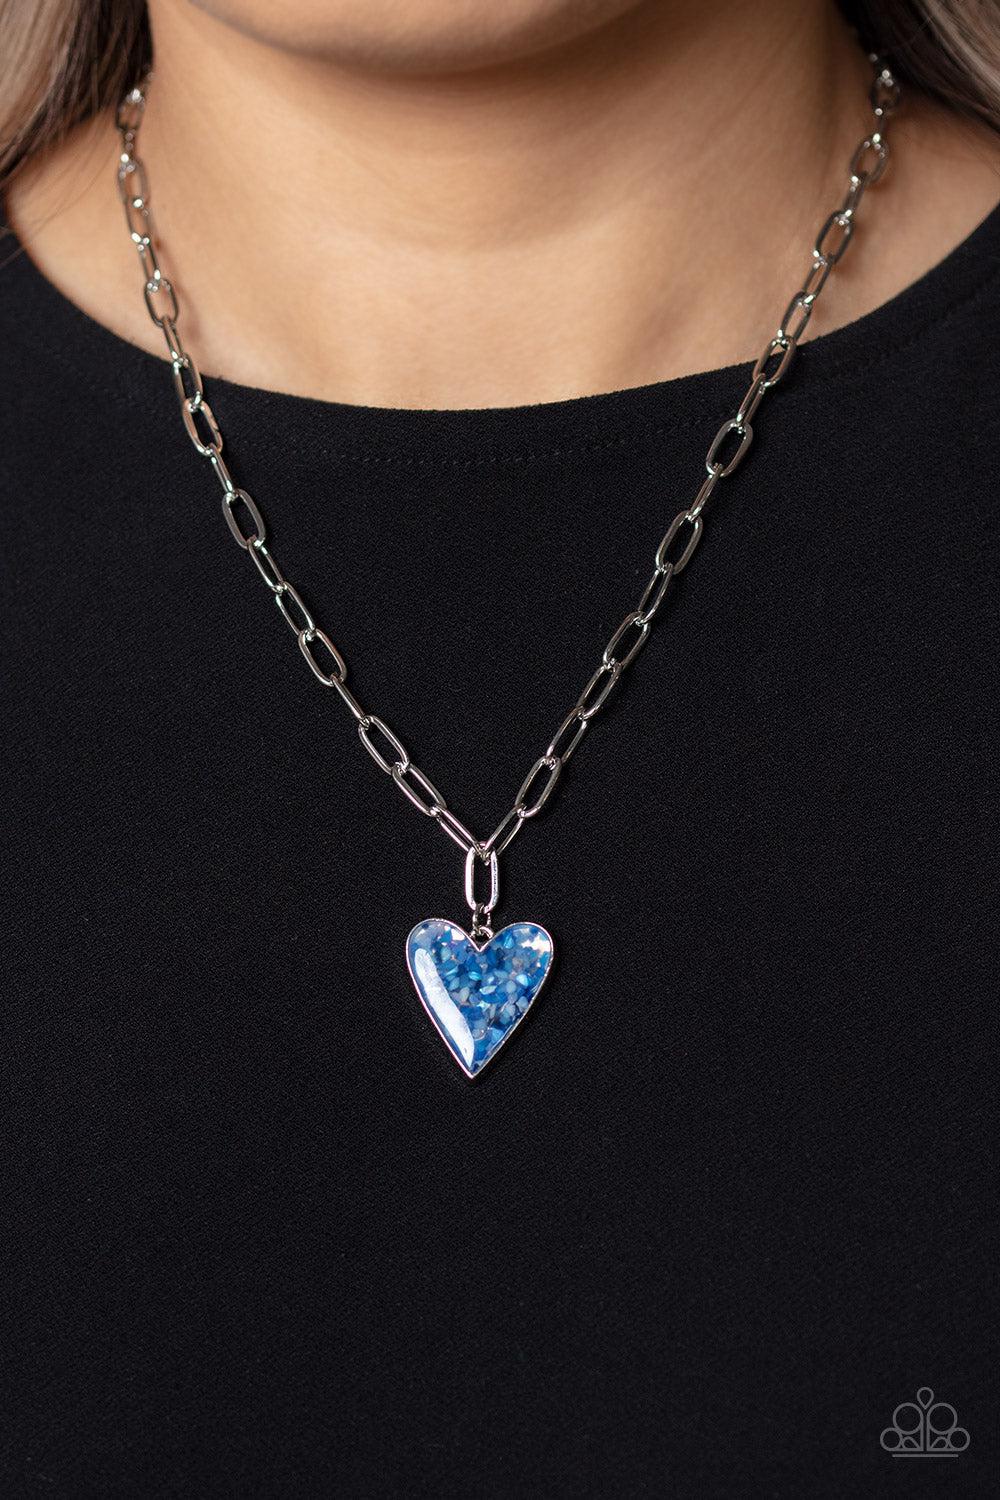 Kiss and SHELL Blue Heart Necklace - Paparazzi Accessories- lightbox - CarasShop.com - $5 Jewelry by Cara Jewels